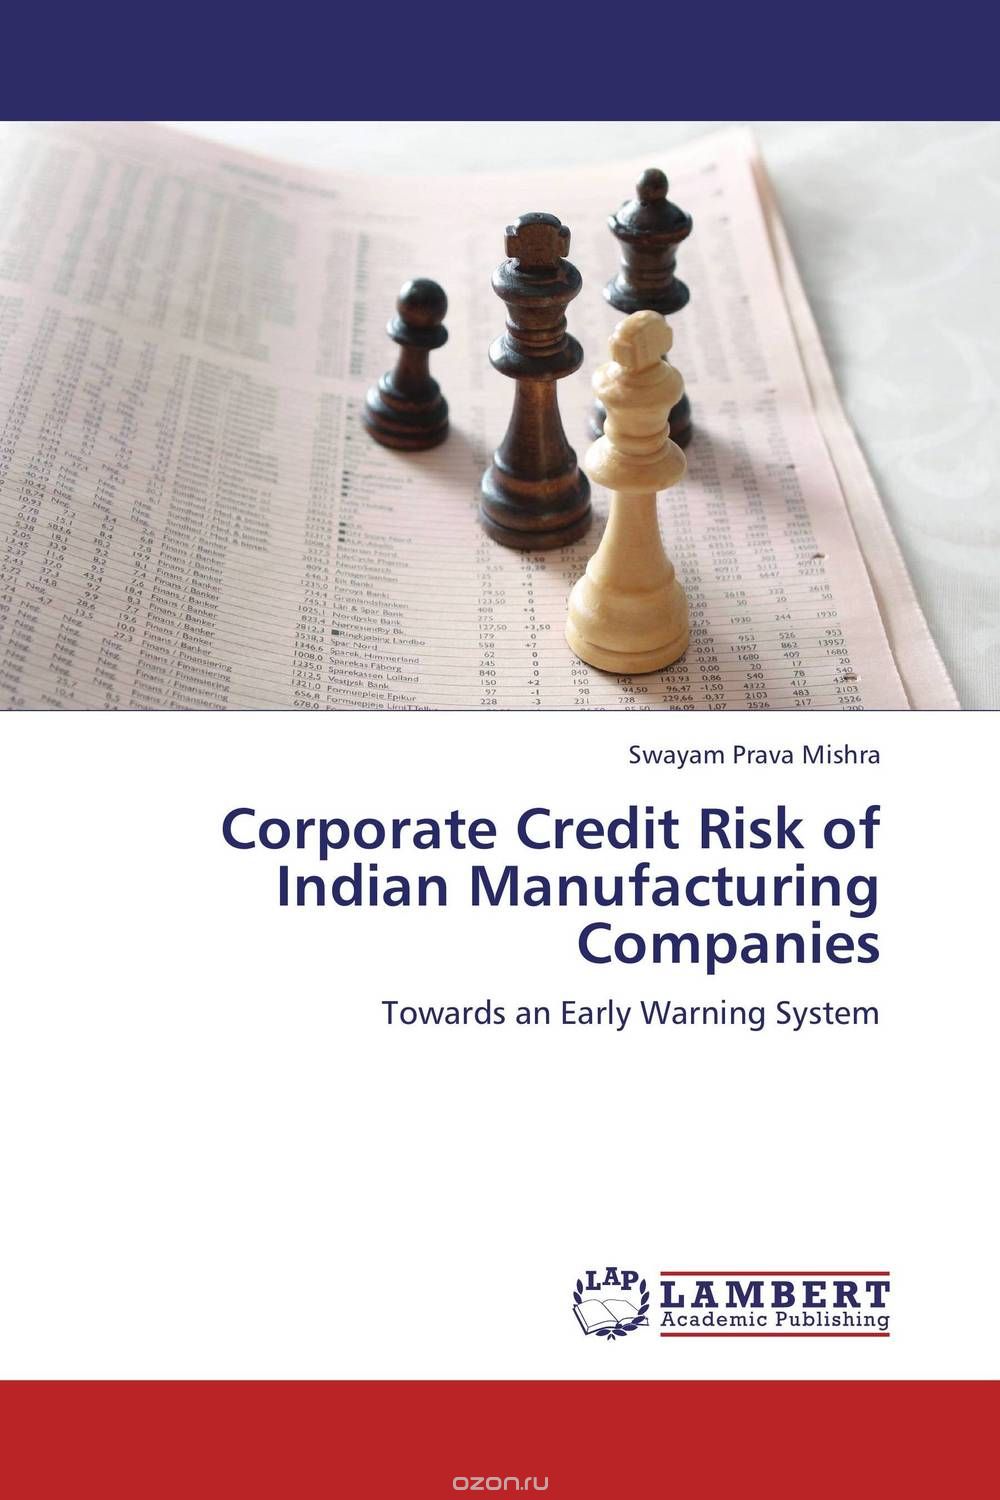 Corporate Credit Risk of Indian Manufacturing Companies